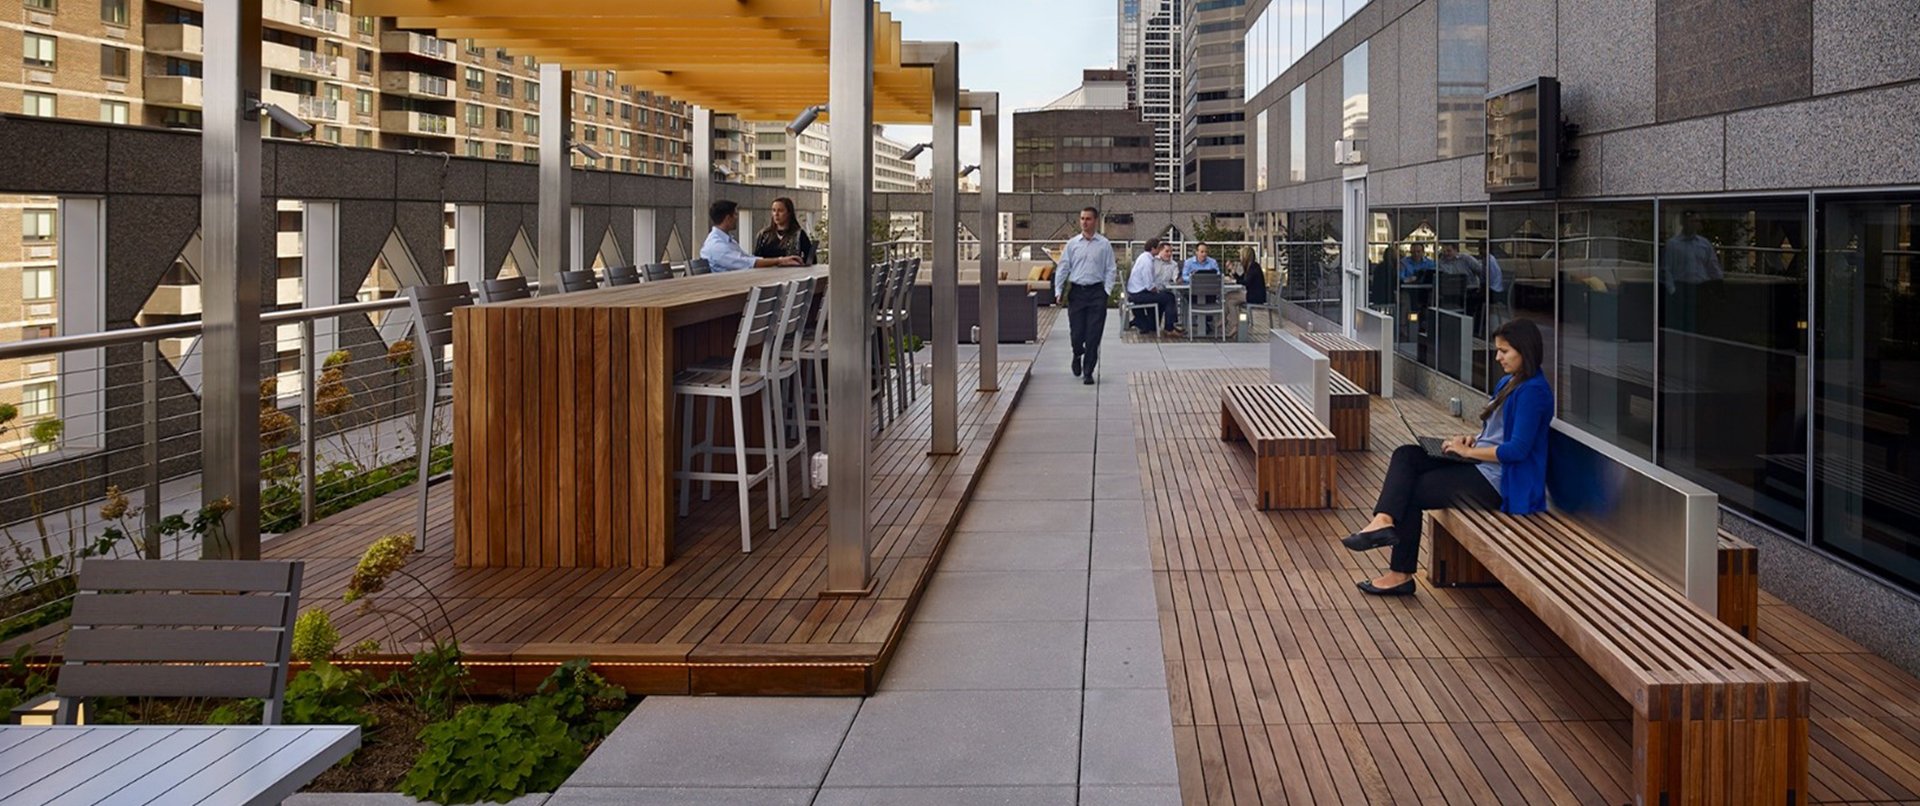 Rooftop deck on a pitched roof featured image